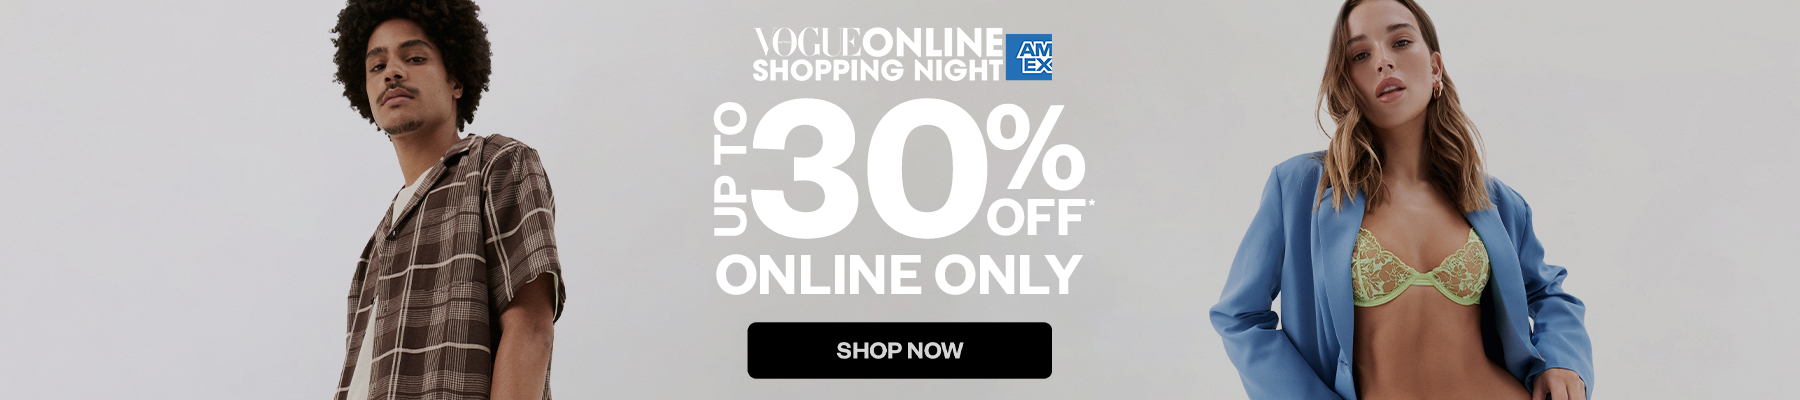 VOSN Shopping Night - Up to 30% OFF General Pants discount on clothing & footwear